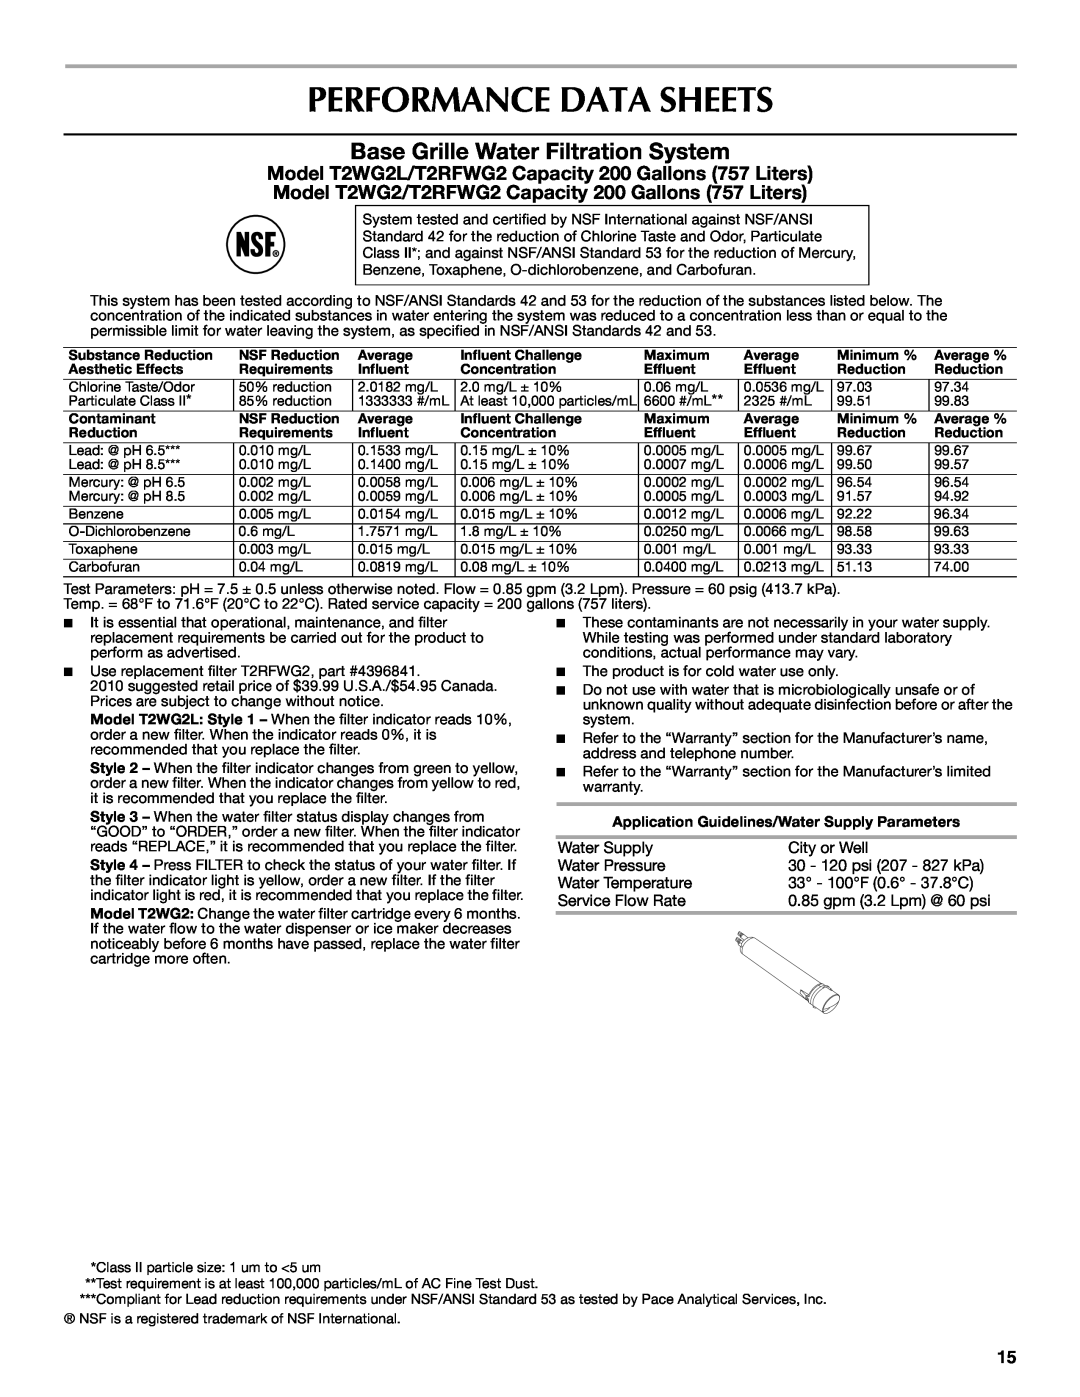 Maytag W10321481A installation instructions Performance Data Sheets, Base Grille Water Filtration System 